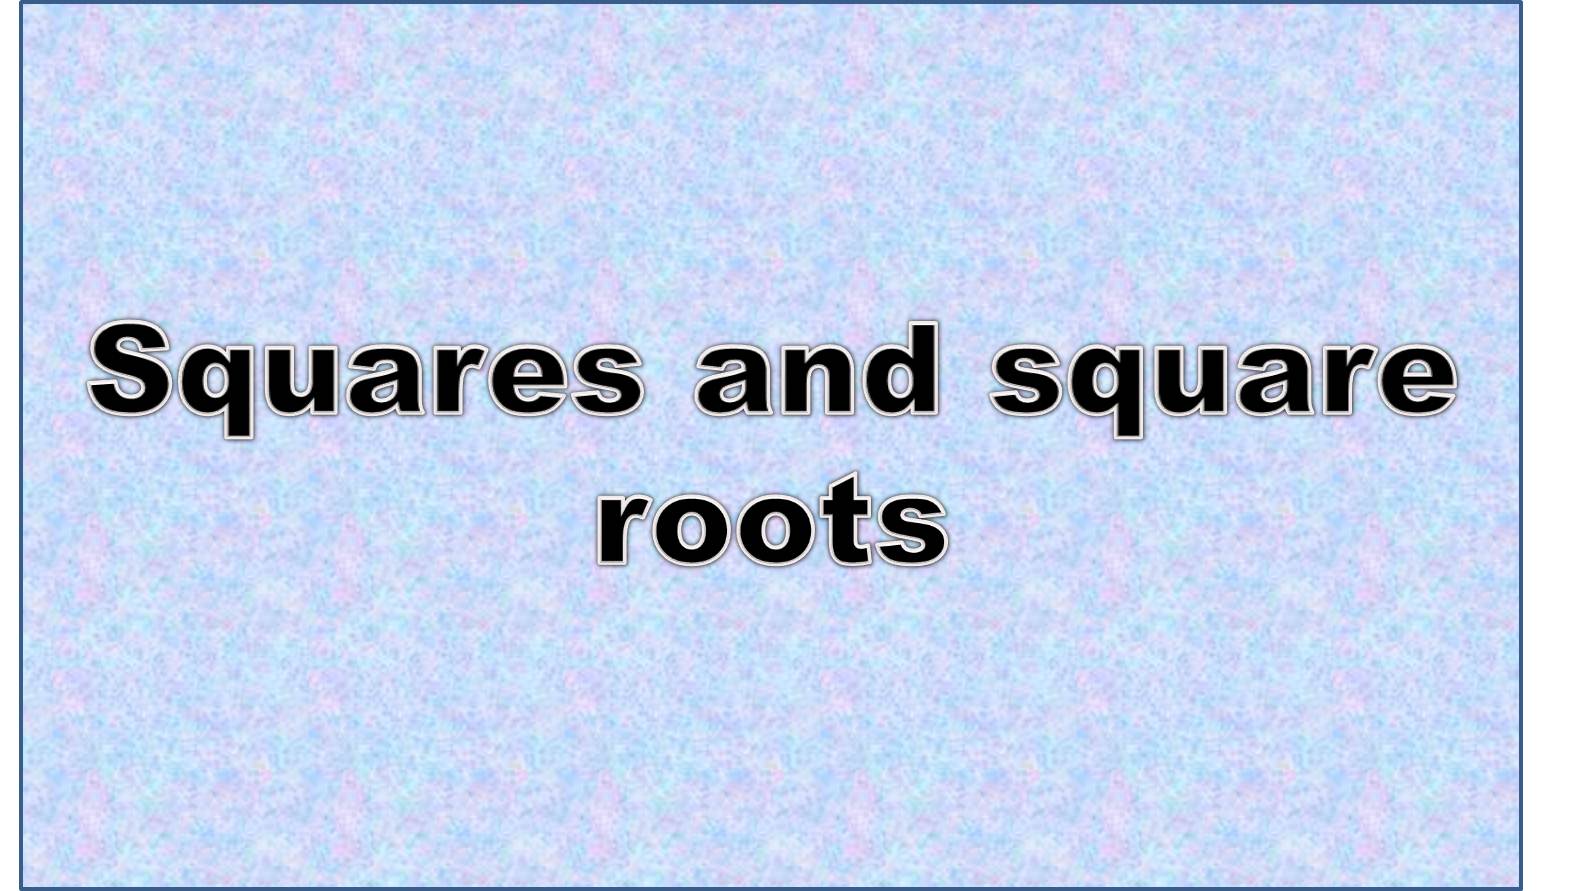 http://study.aisectonline.com/images/Approximating square roots to hundredths.jpg